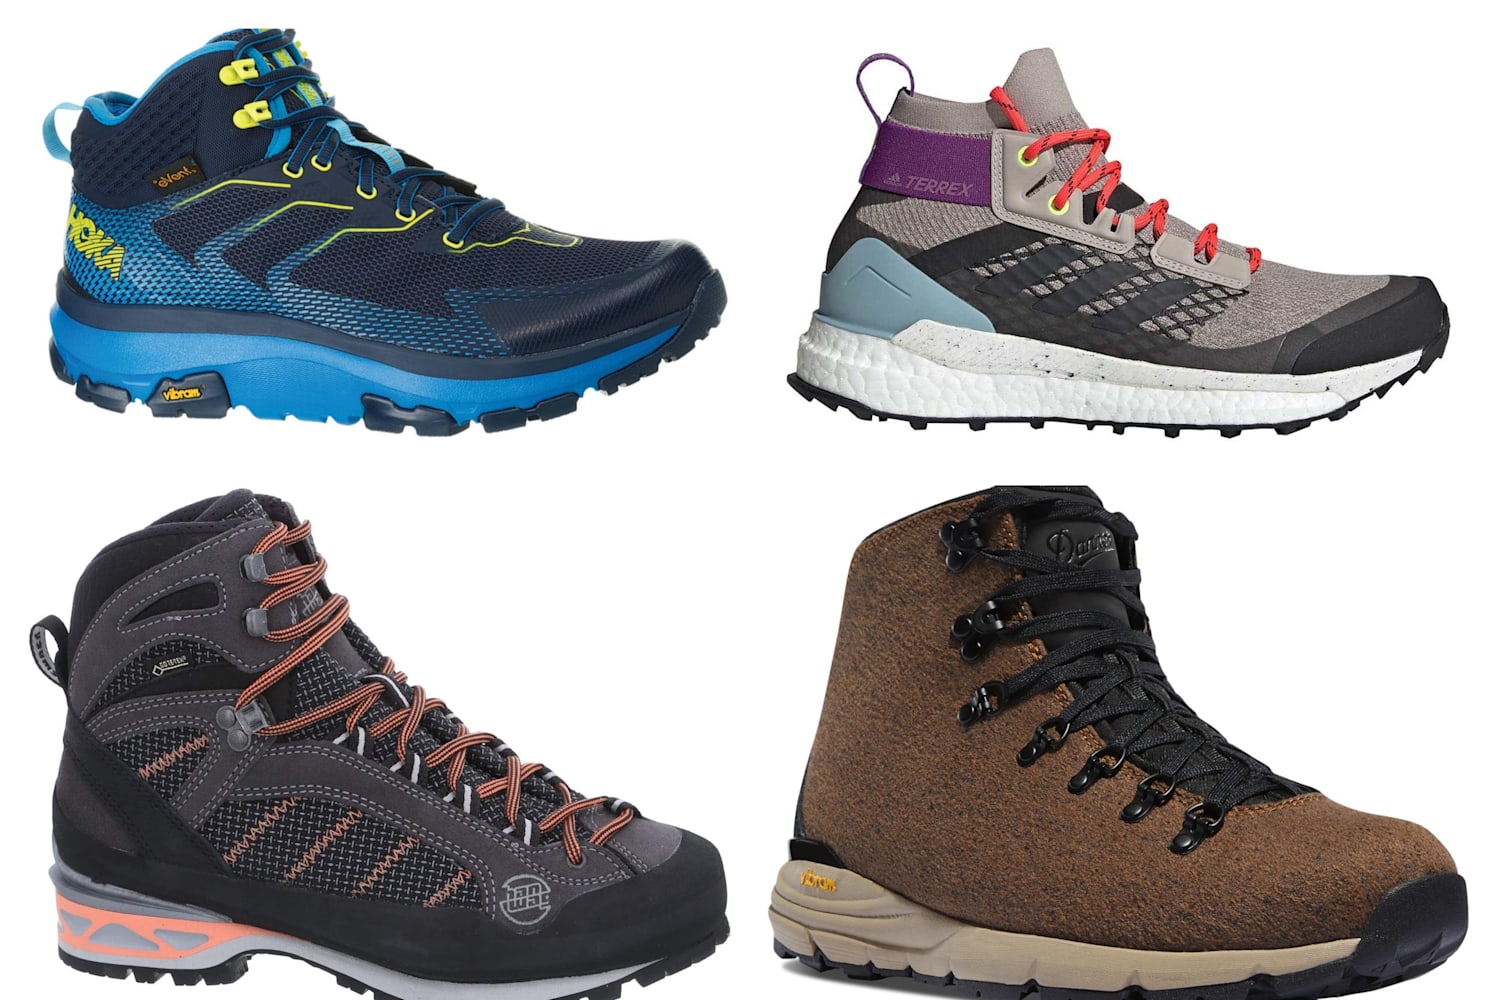 Best hiking shoes to buy: the top 12 on 